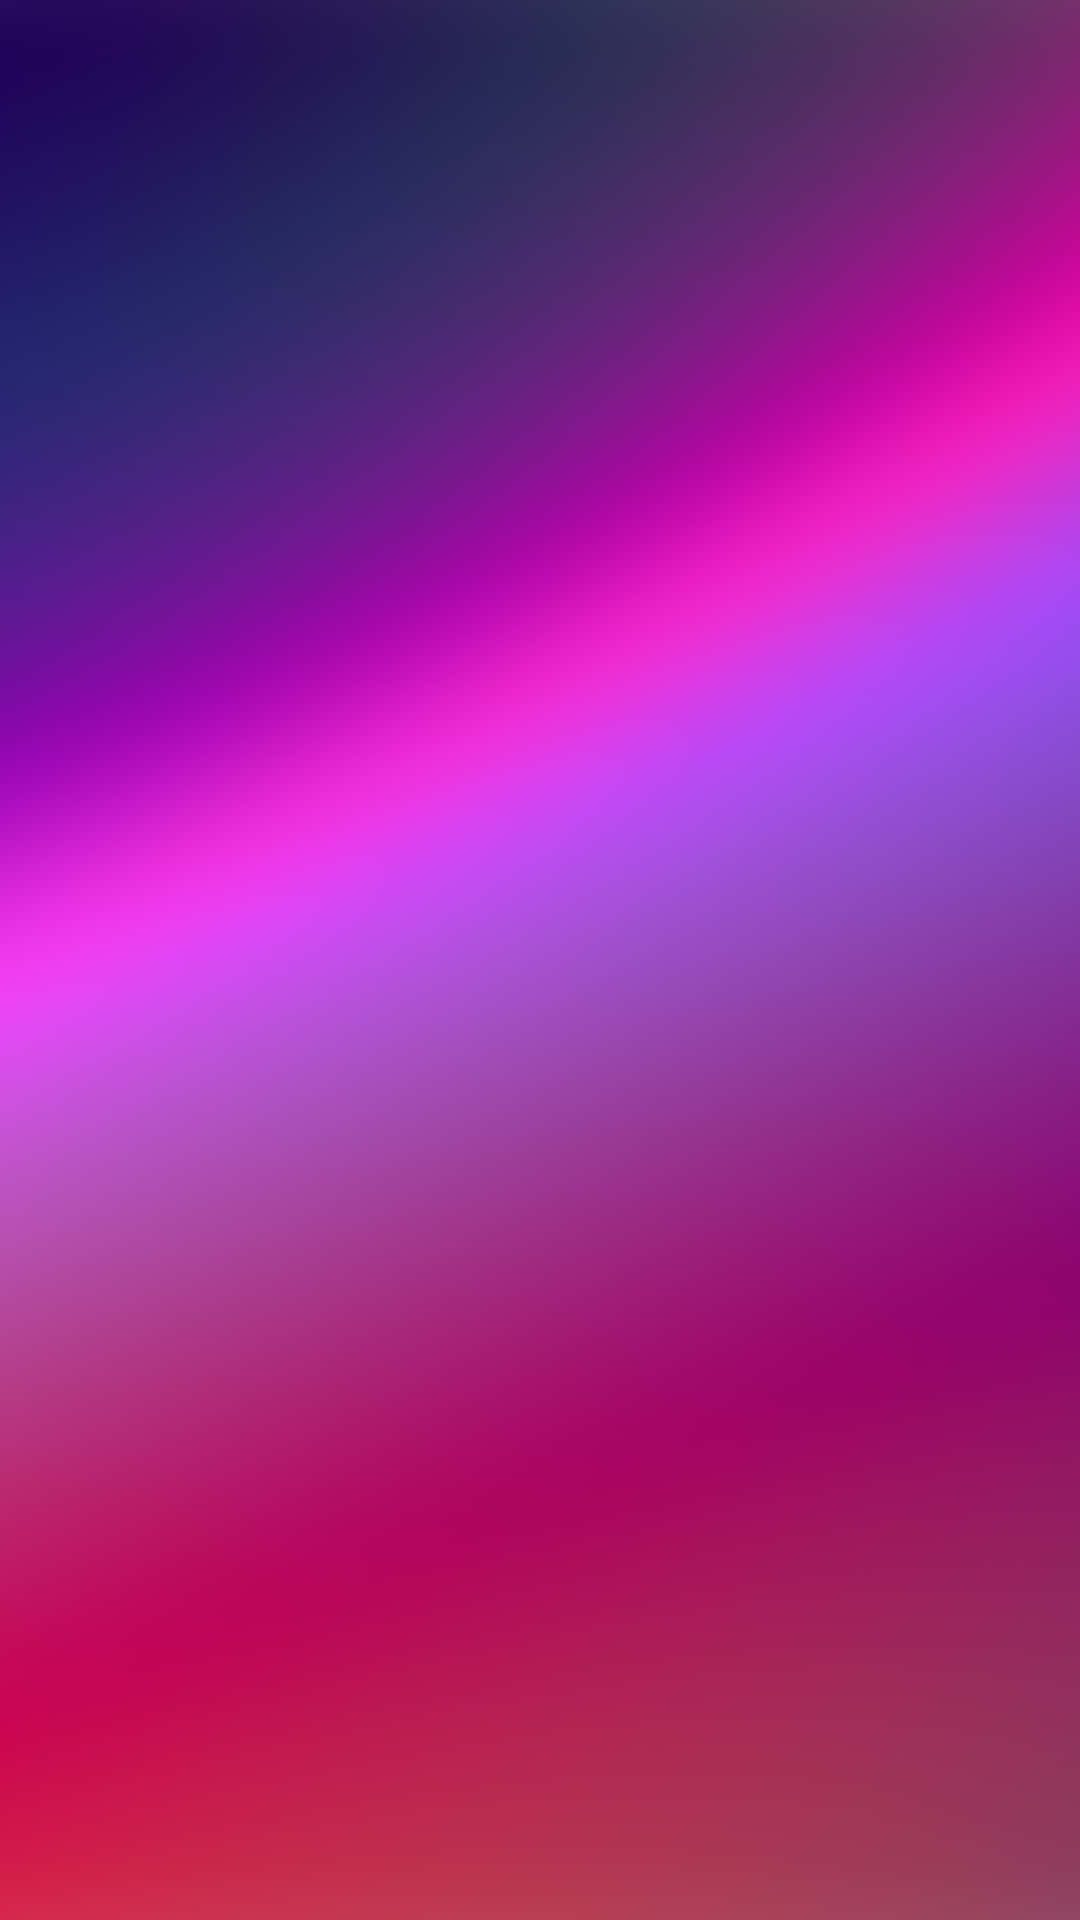 A vibrant, modern looking bright pink background